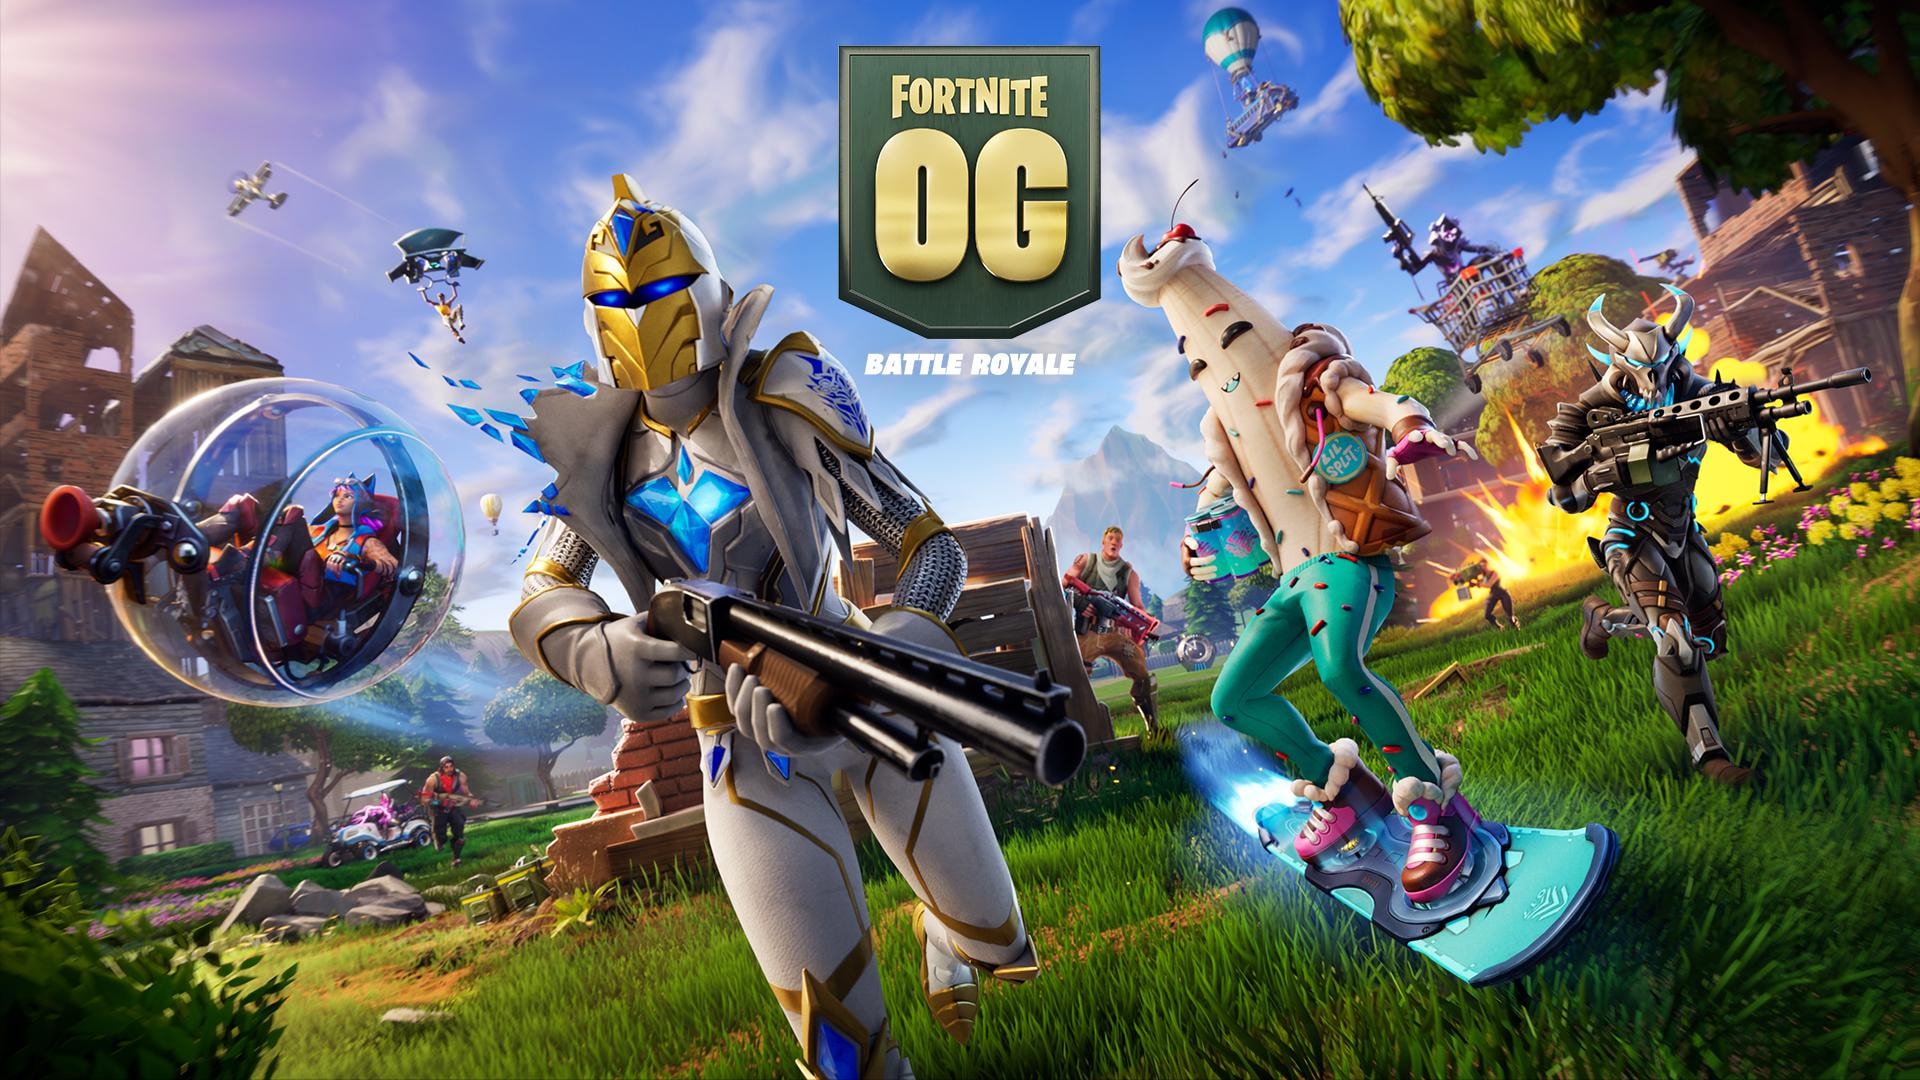 fortnite-og-breaks-its-all-time-player-records-at-launch